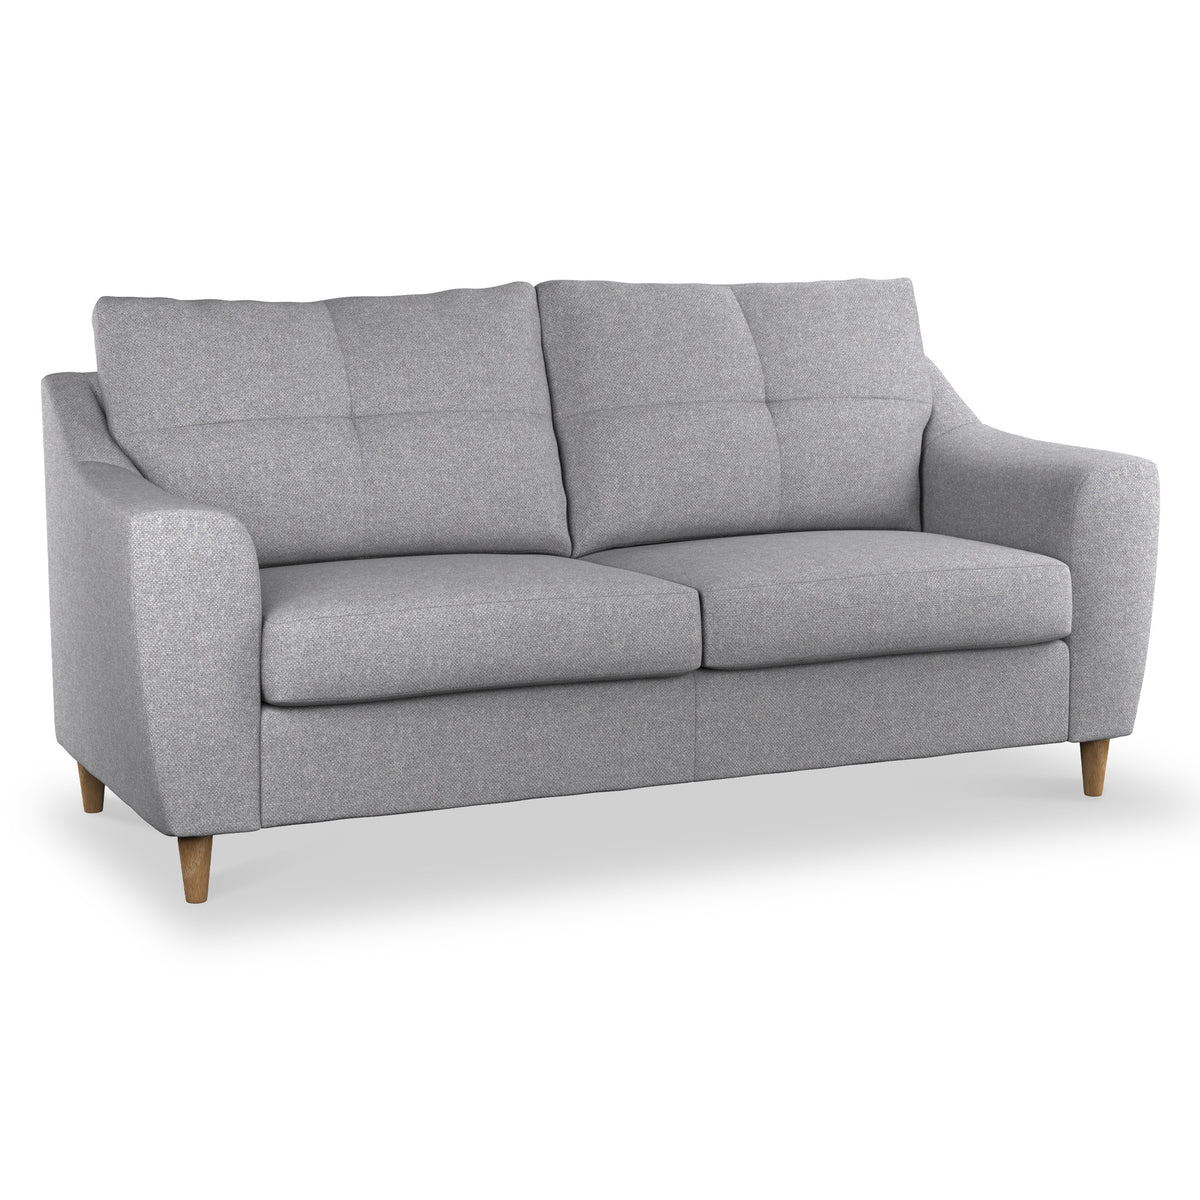 Justin Silver 3 Seater Sofa from Roseland Furniture